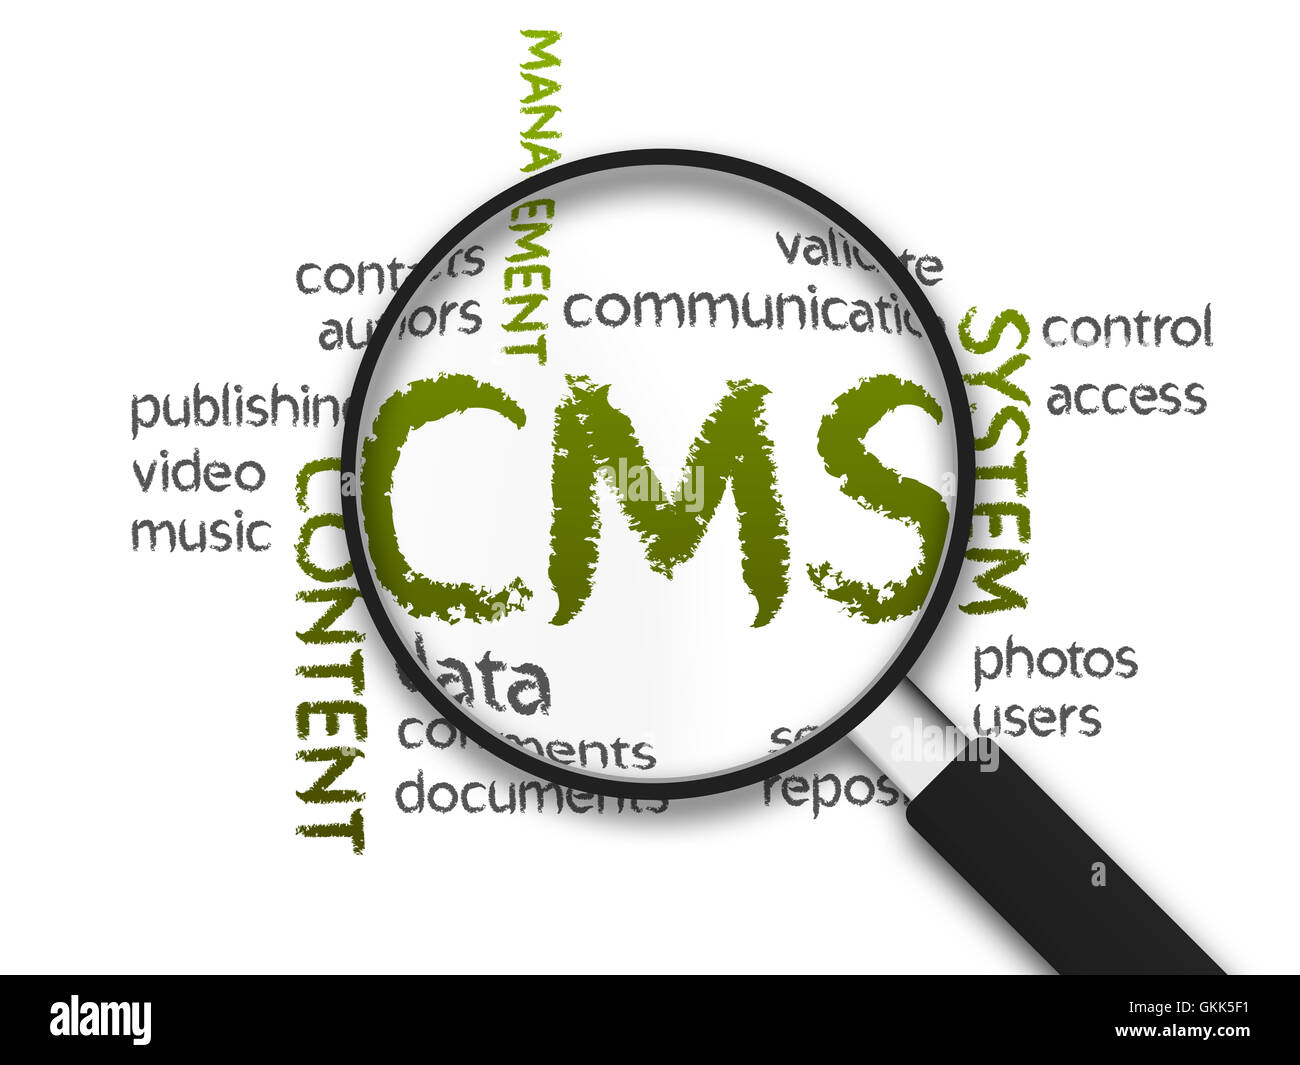 Content Management System Stock Photo